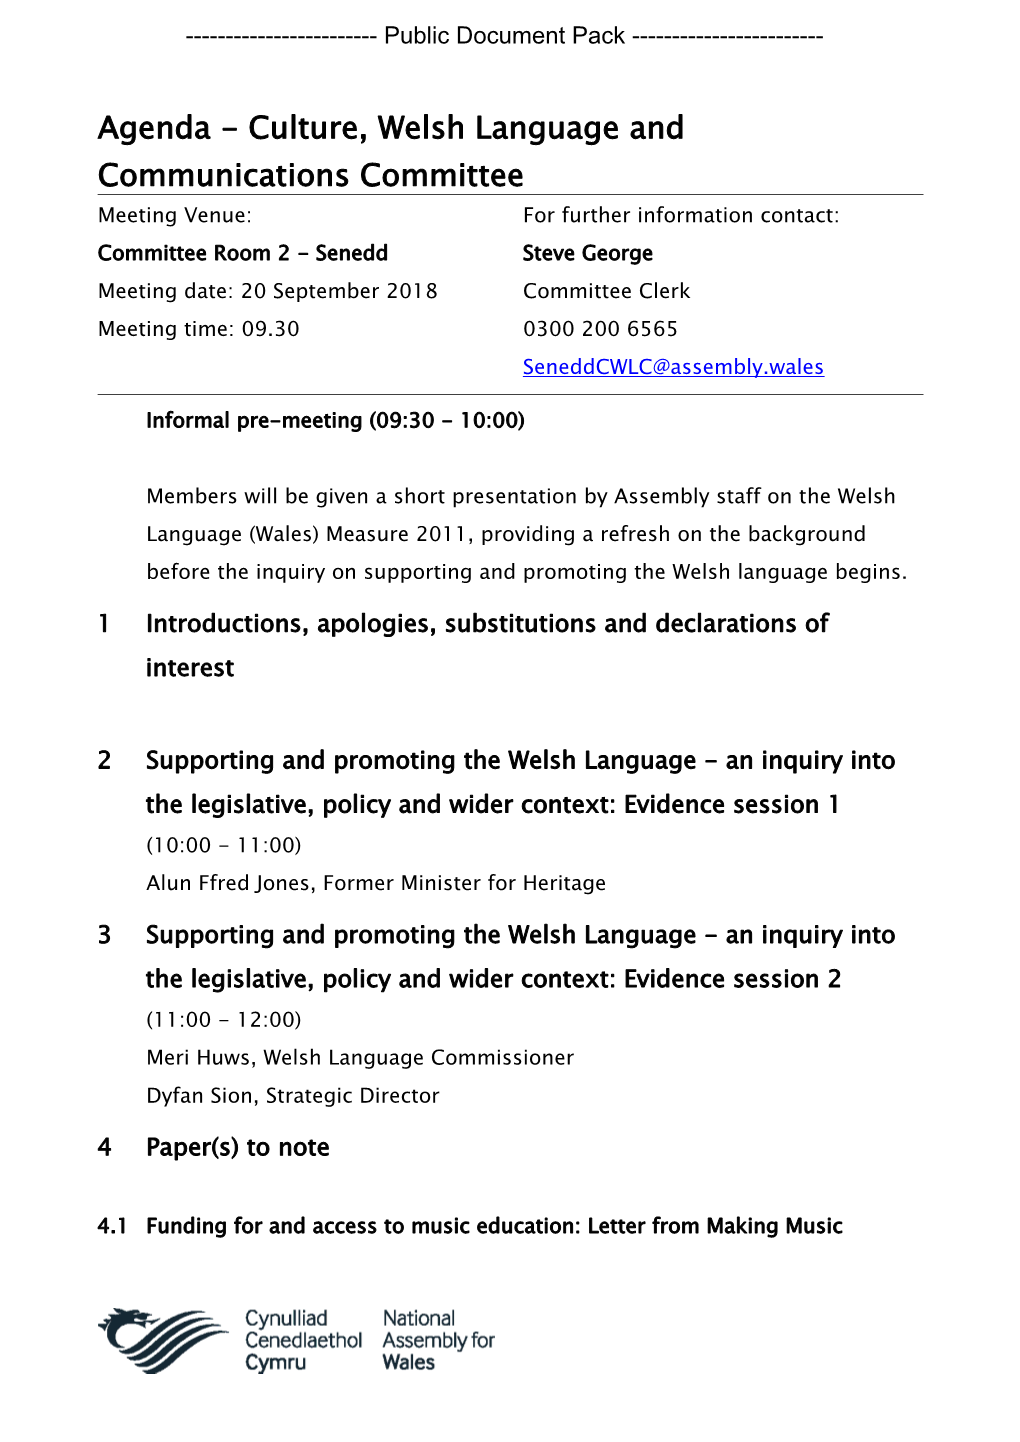 (Public Pack)Agenda Document for Culture, Welsh Language and Communications Committee, 20/09/2018 09:30